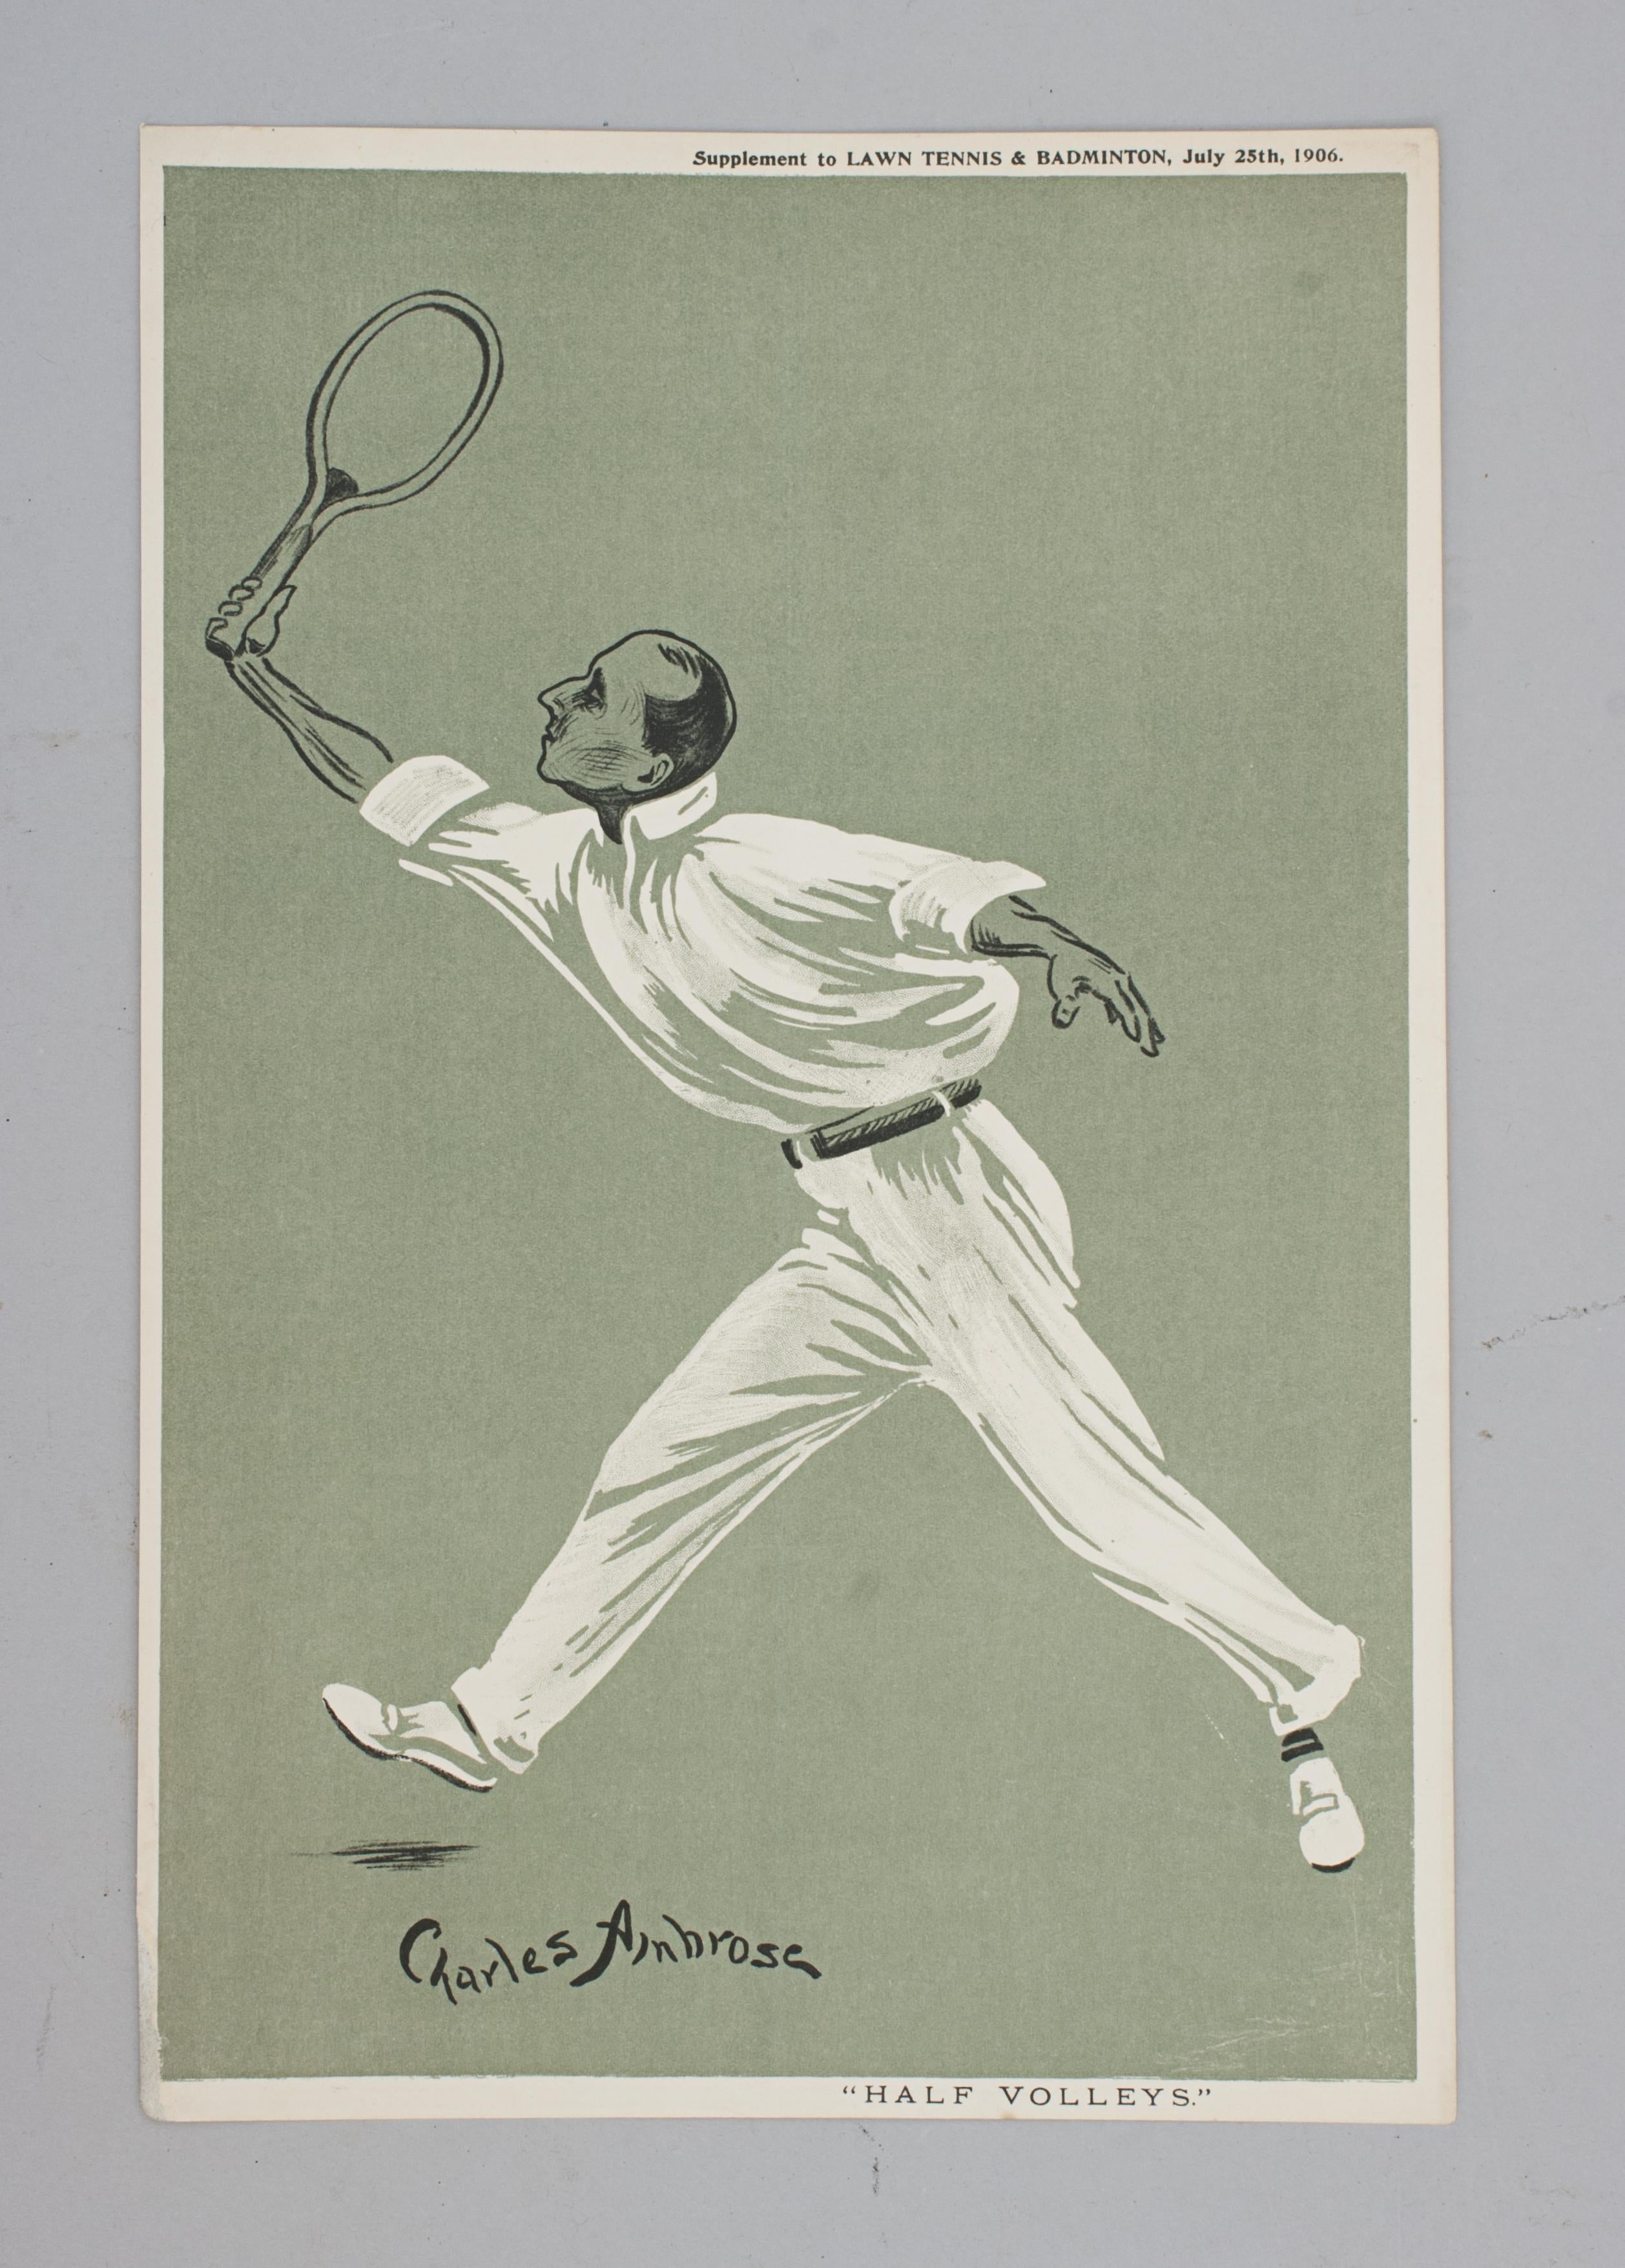 Ten Tennis Caricatures By Charles Ambrose From Supplement To Lawn Tennis & Badminton.
Vintage Lawn Tennis caricature prints by Charles Ambrose. The prints were all 'Supplement to Lawn Tennis & Badminton' magazine. The ten prints are in good